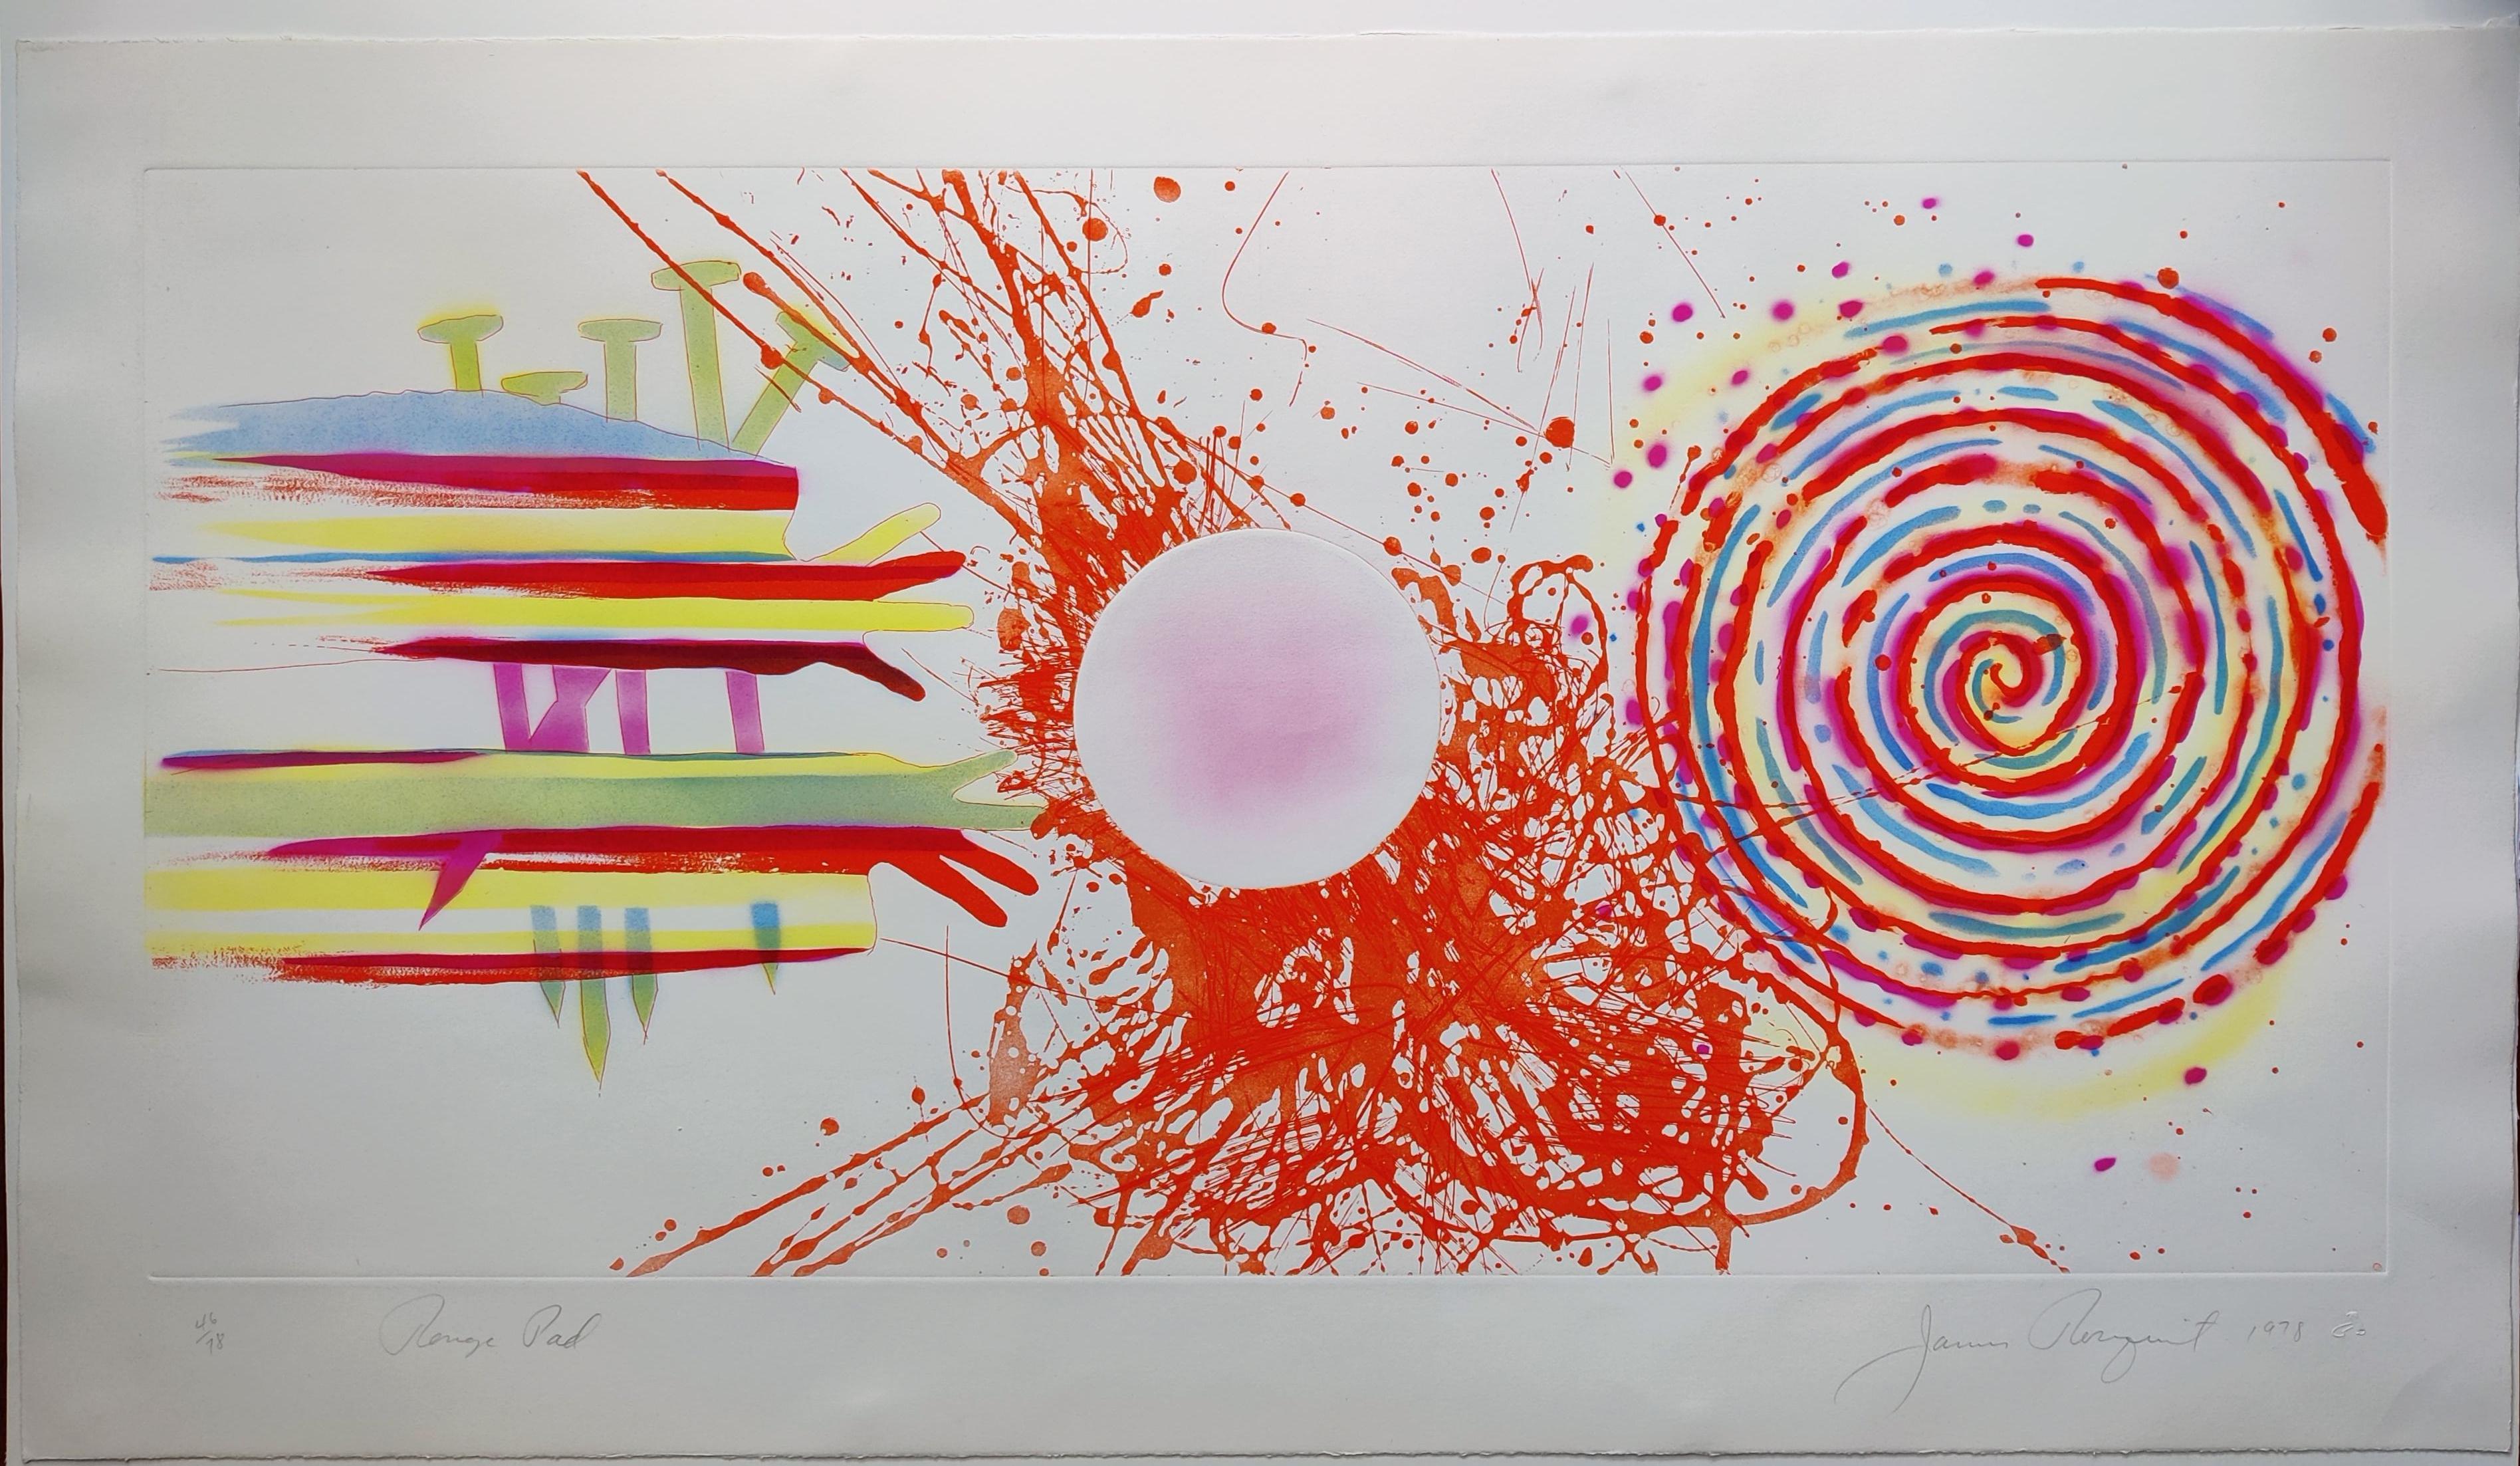 James Rosenquist 
Rouge Pad, 1978 
 Etching, aquatint
57.2 x 101.6 cm
Unframed, 
Hand-signed, titled, dated and numbered, 46/78, in pencil
Noted as Glenn 134 in the artist’s catalogue raisonne. 
